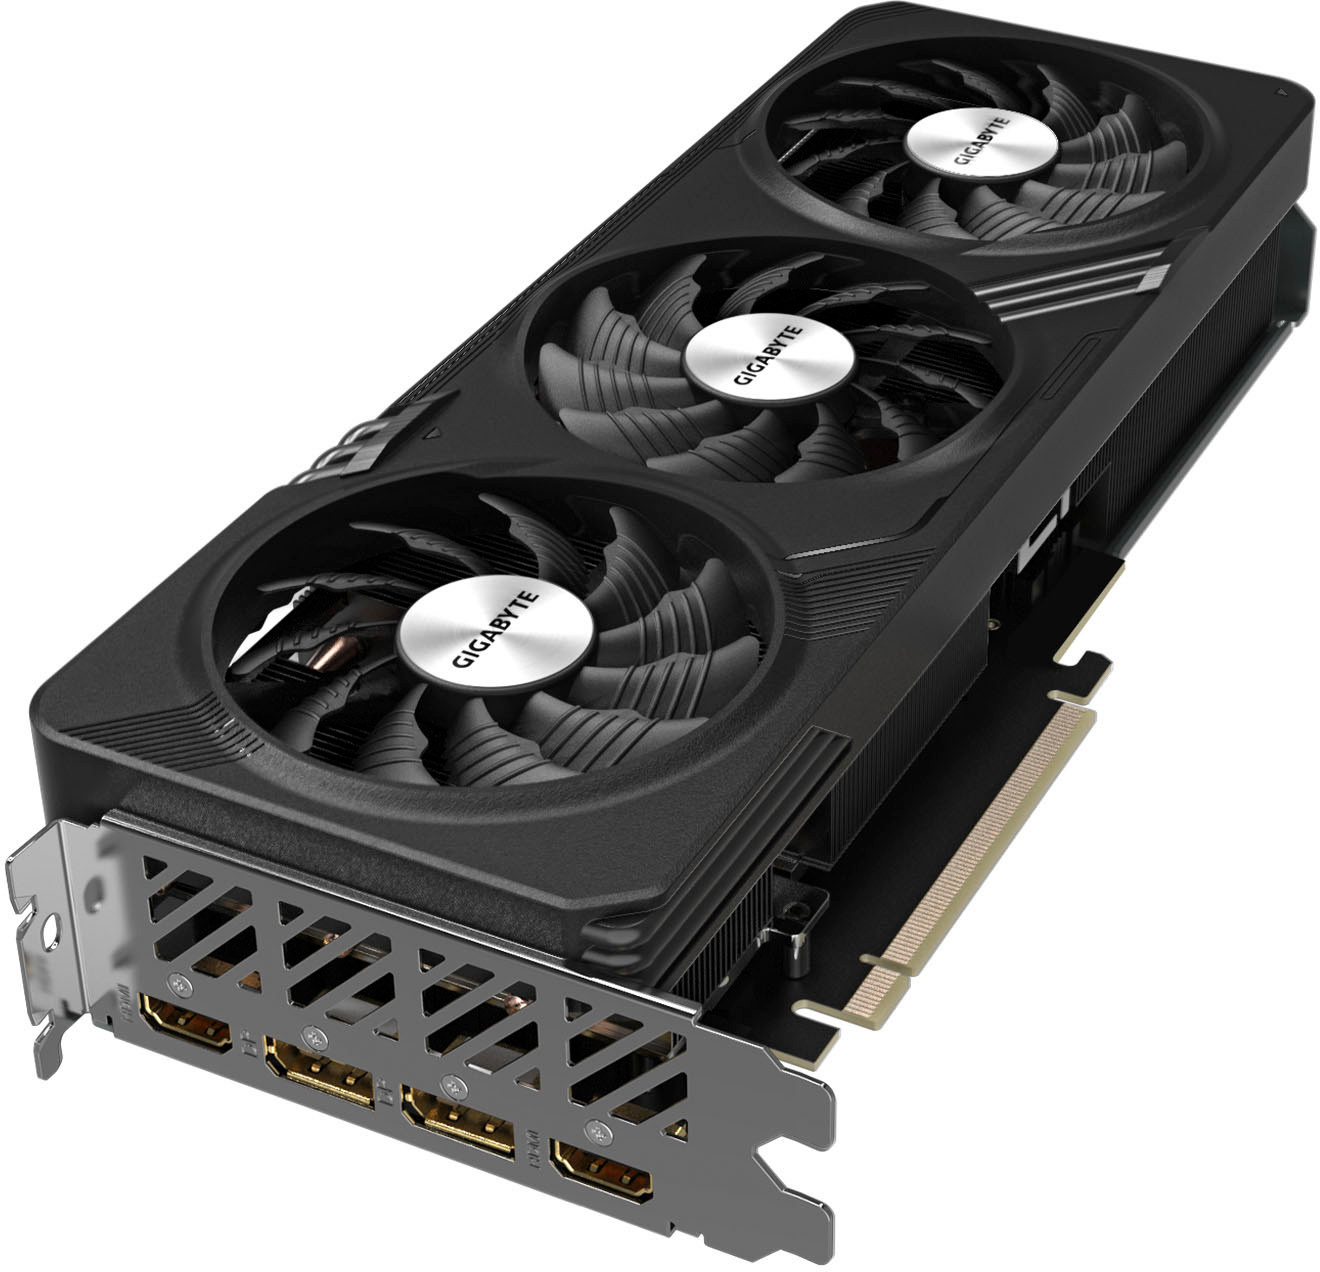 Will The GeForce RTX 4060 Still Be A Good Graphics Card? In The First  Tests, It Bypasses The RTX 3060 By 16.6-61.1% - Gadget Tendency